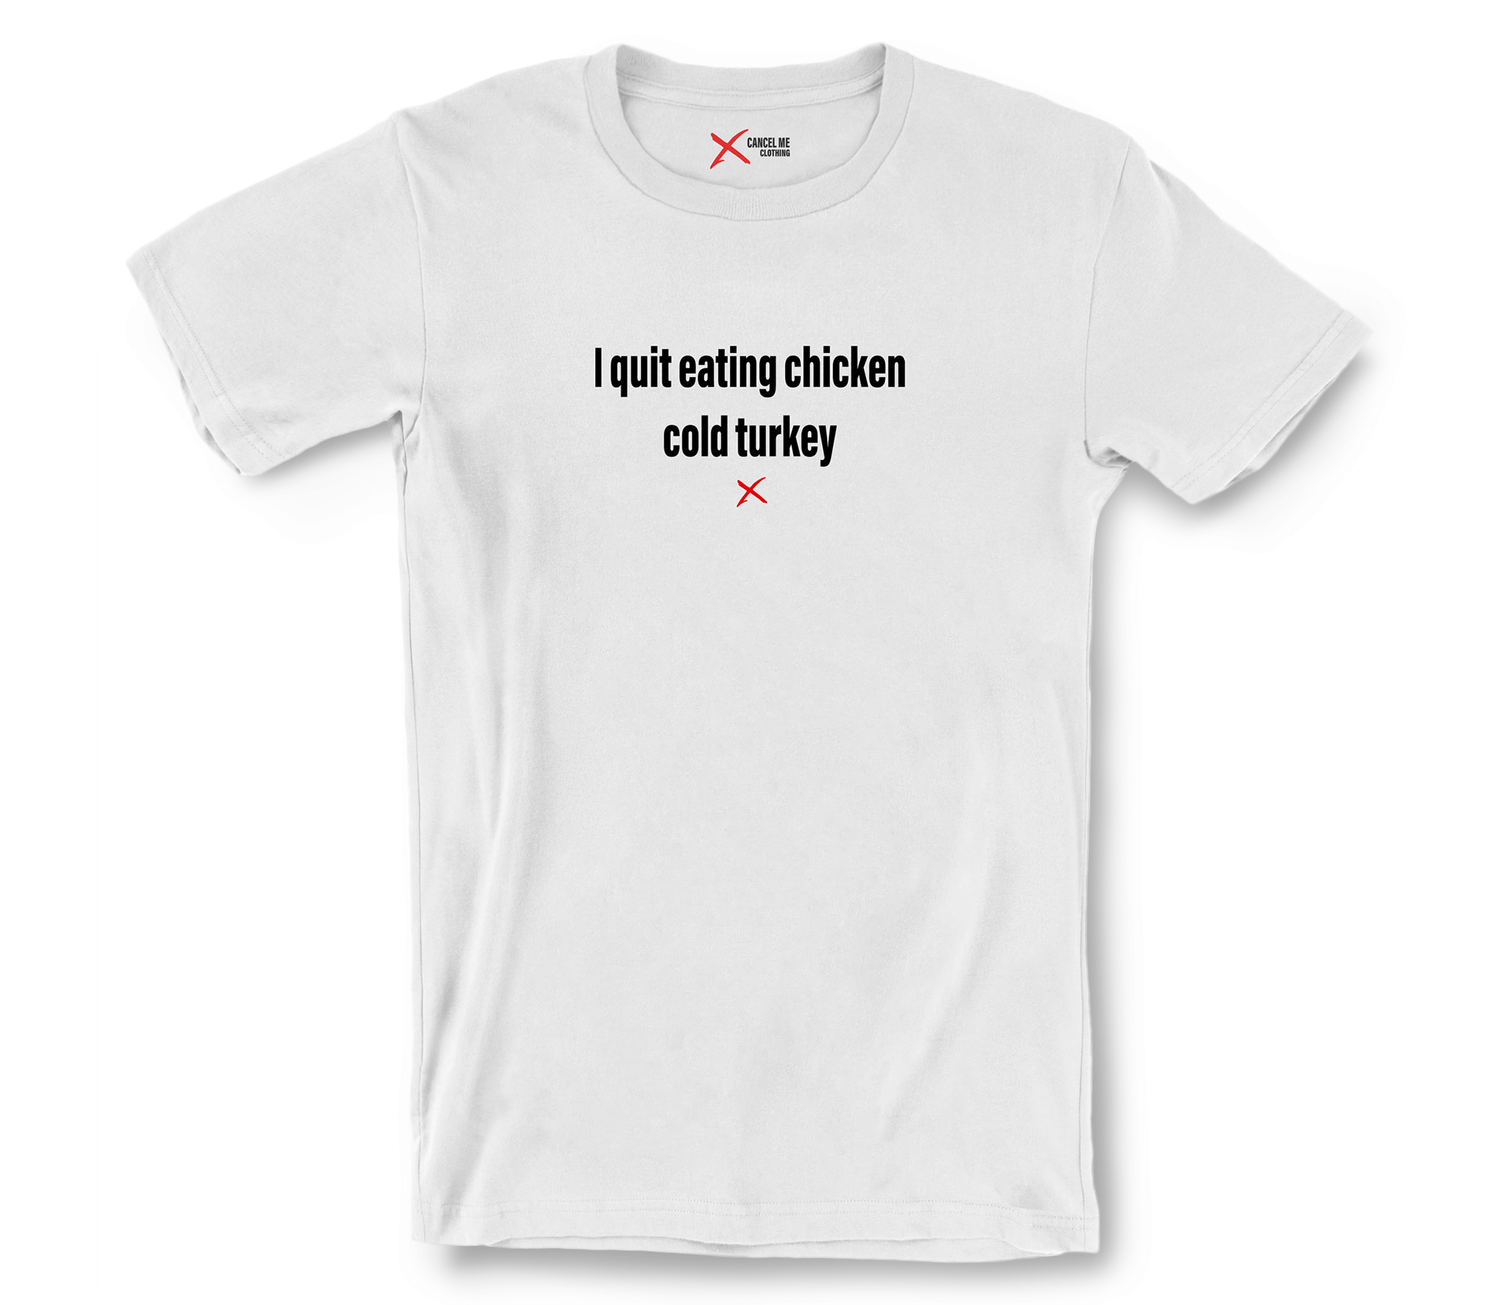 lp-food_2-shirt_7791630385322_i-quit-eating-chicken-cold-turkey-shirt_White.png